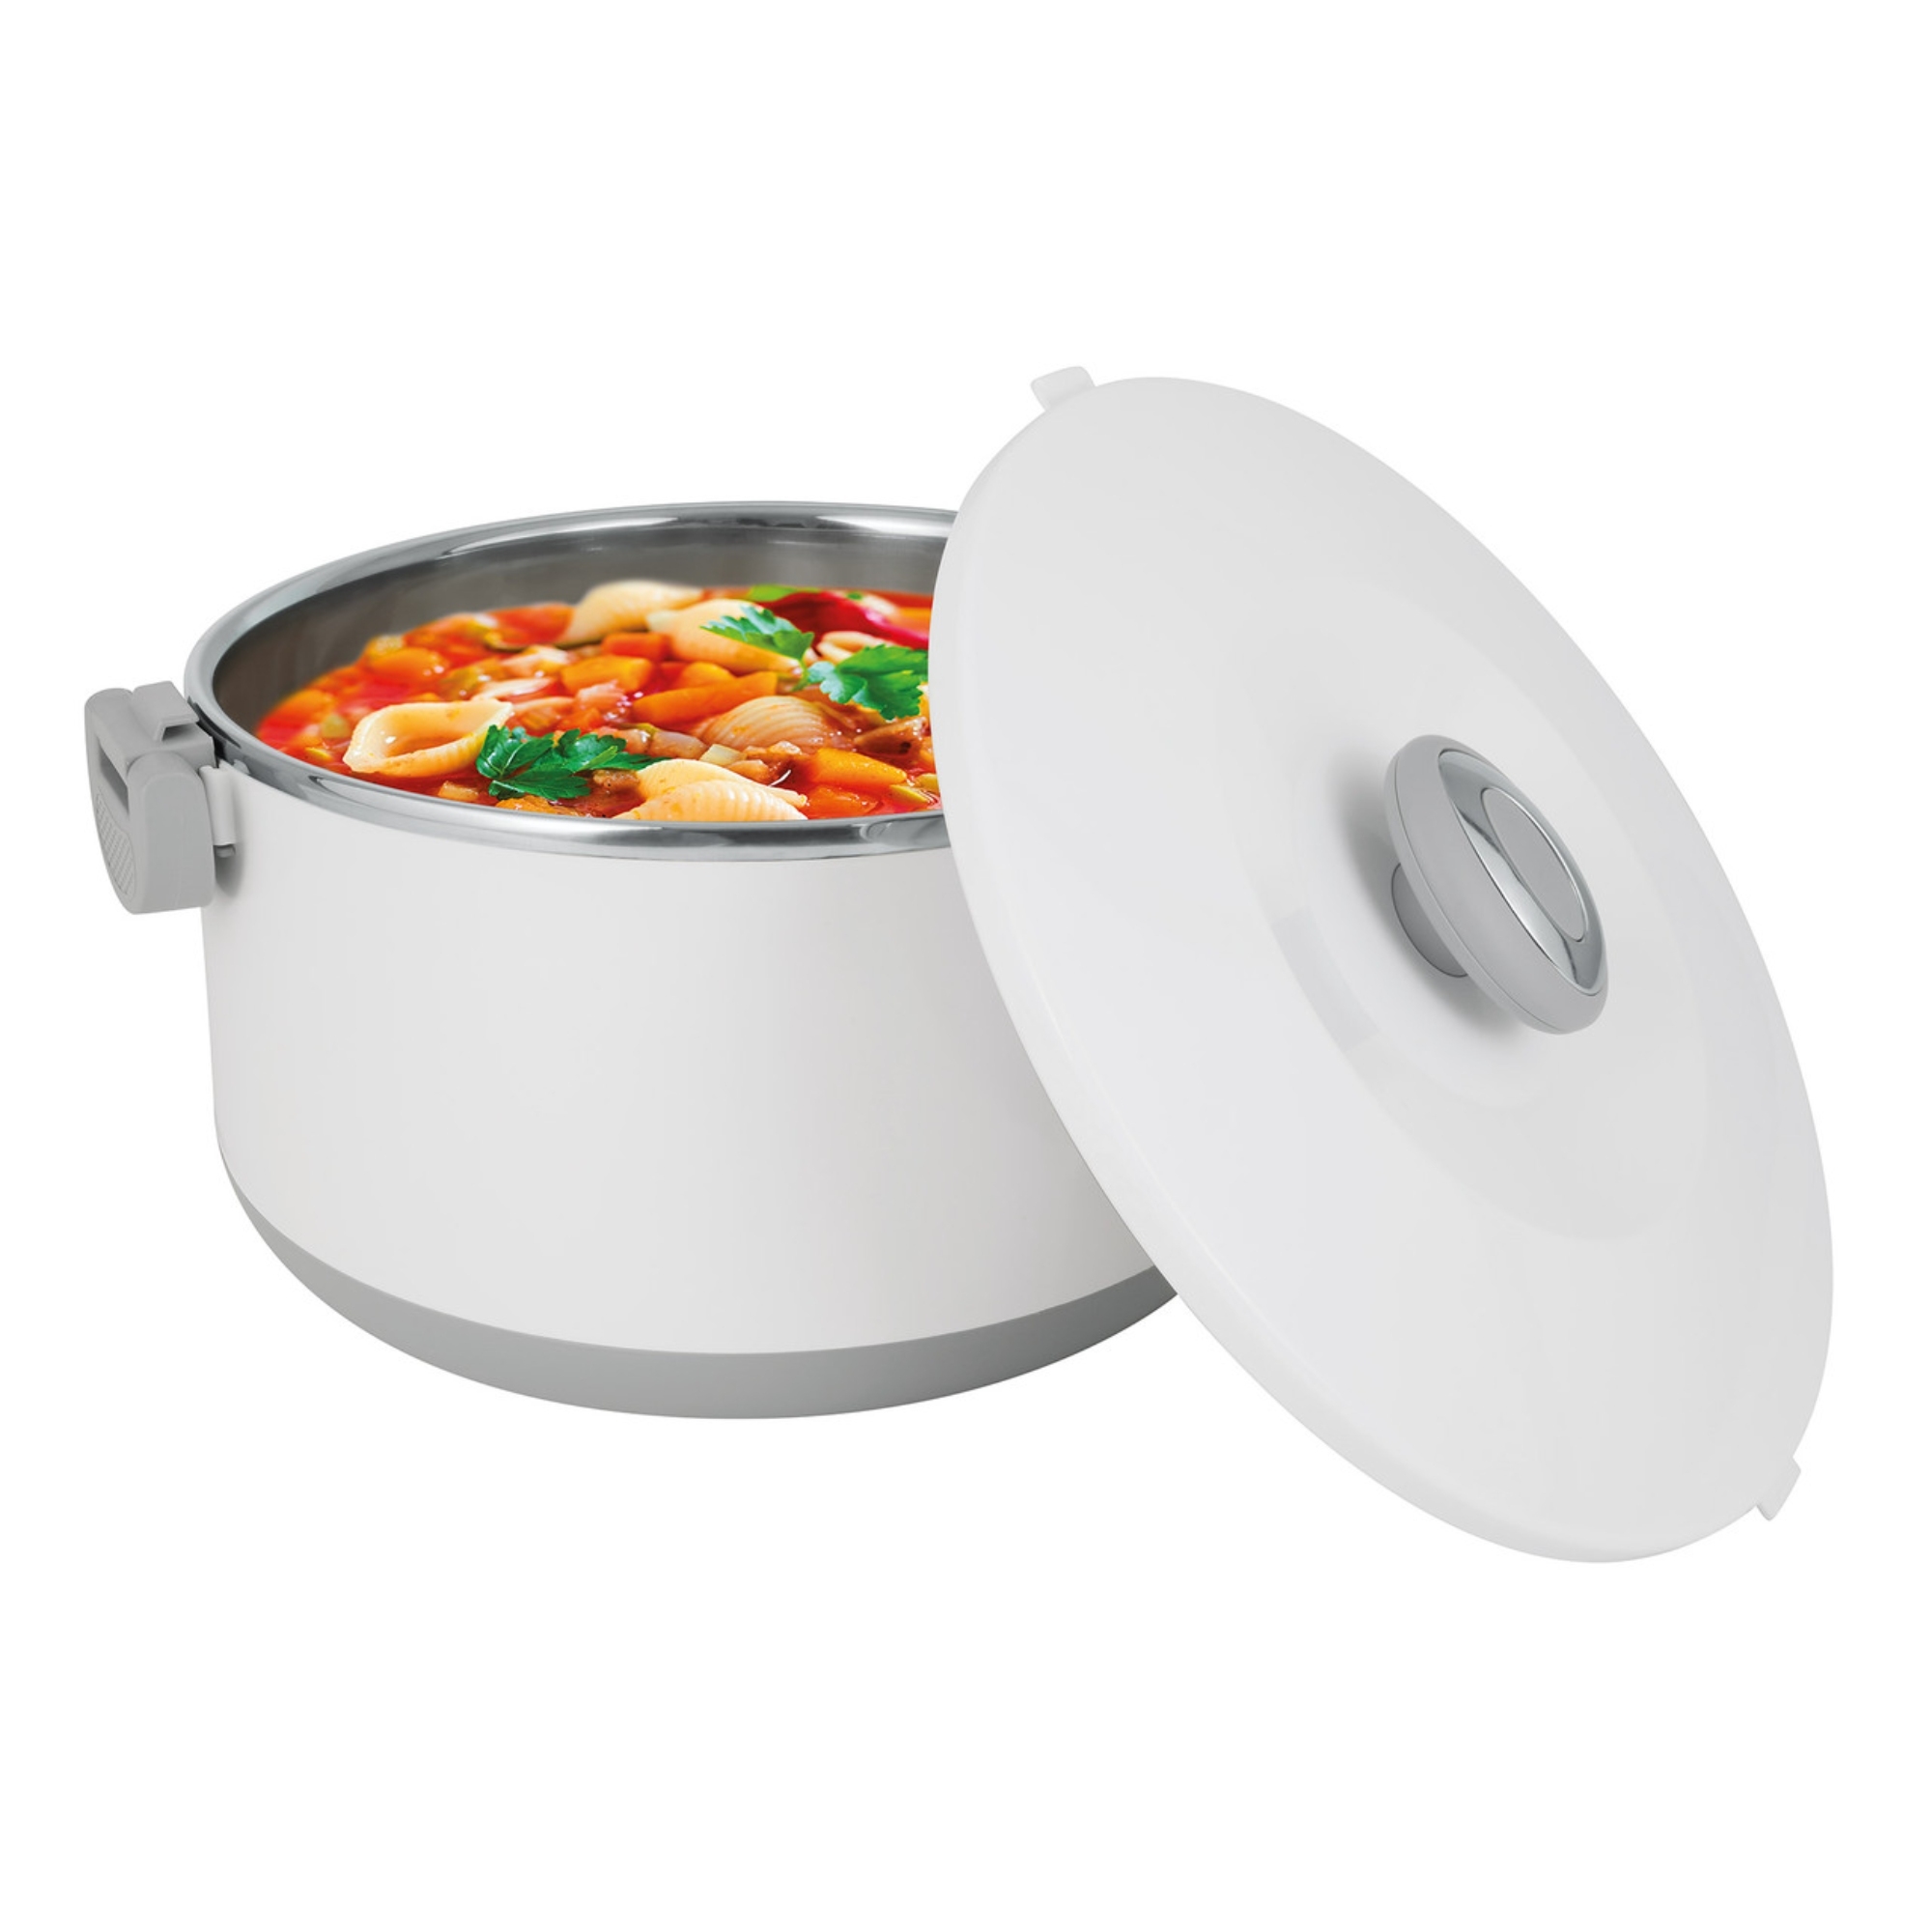 Pyrolux Pyrotherm Food Warmer 10L Image 2